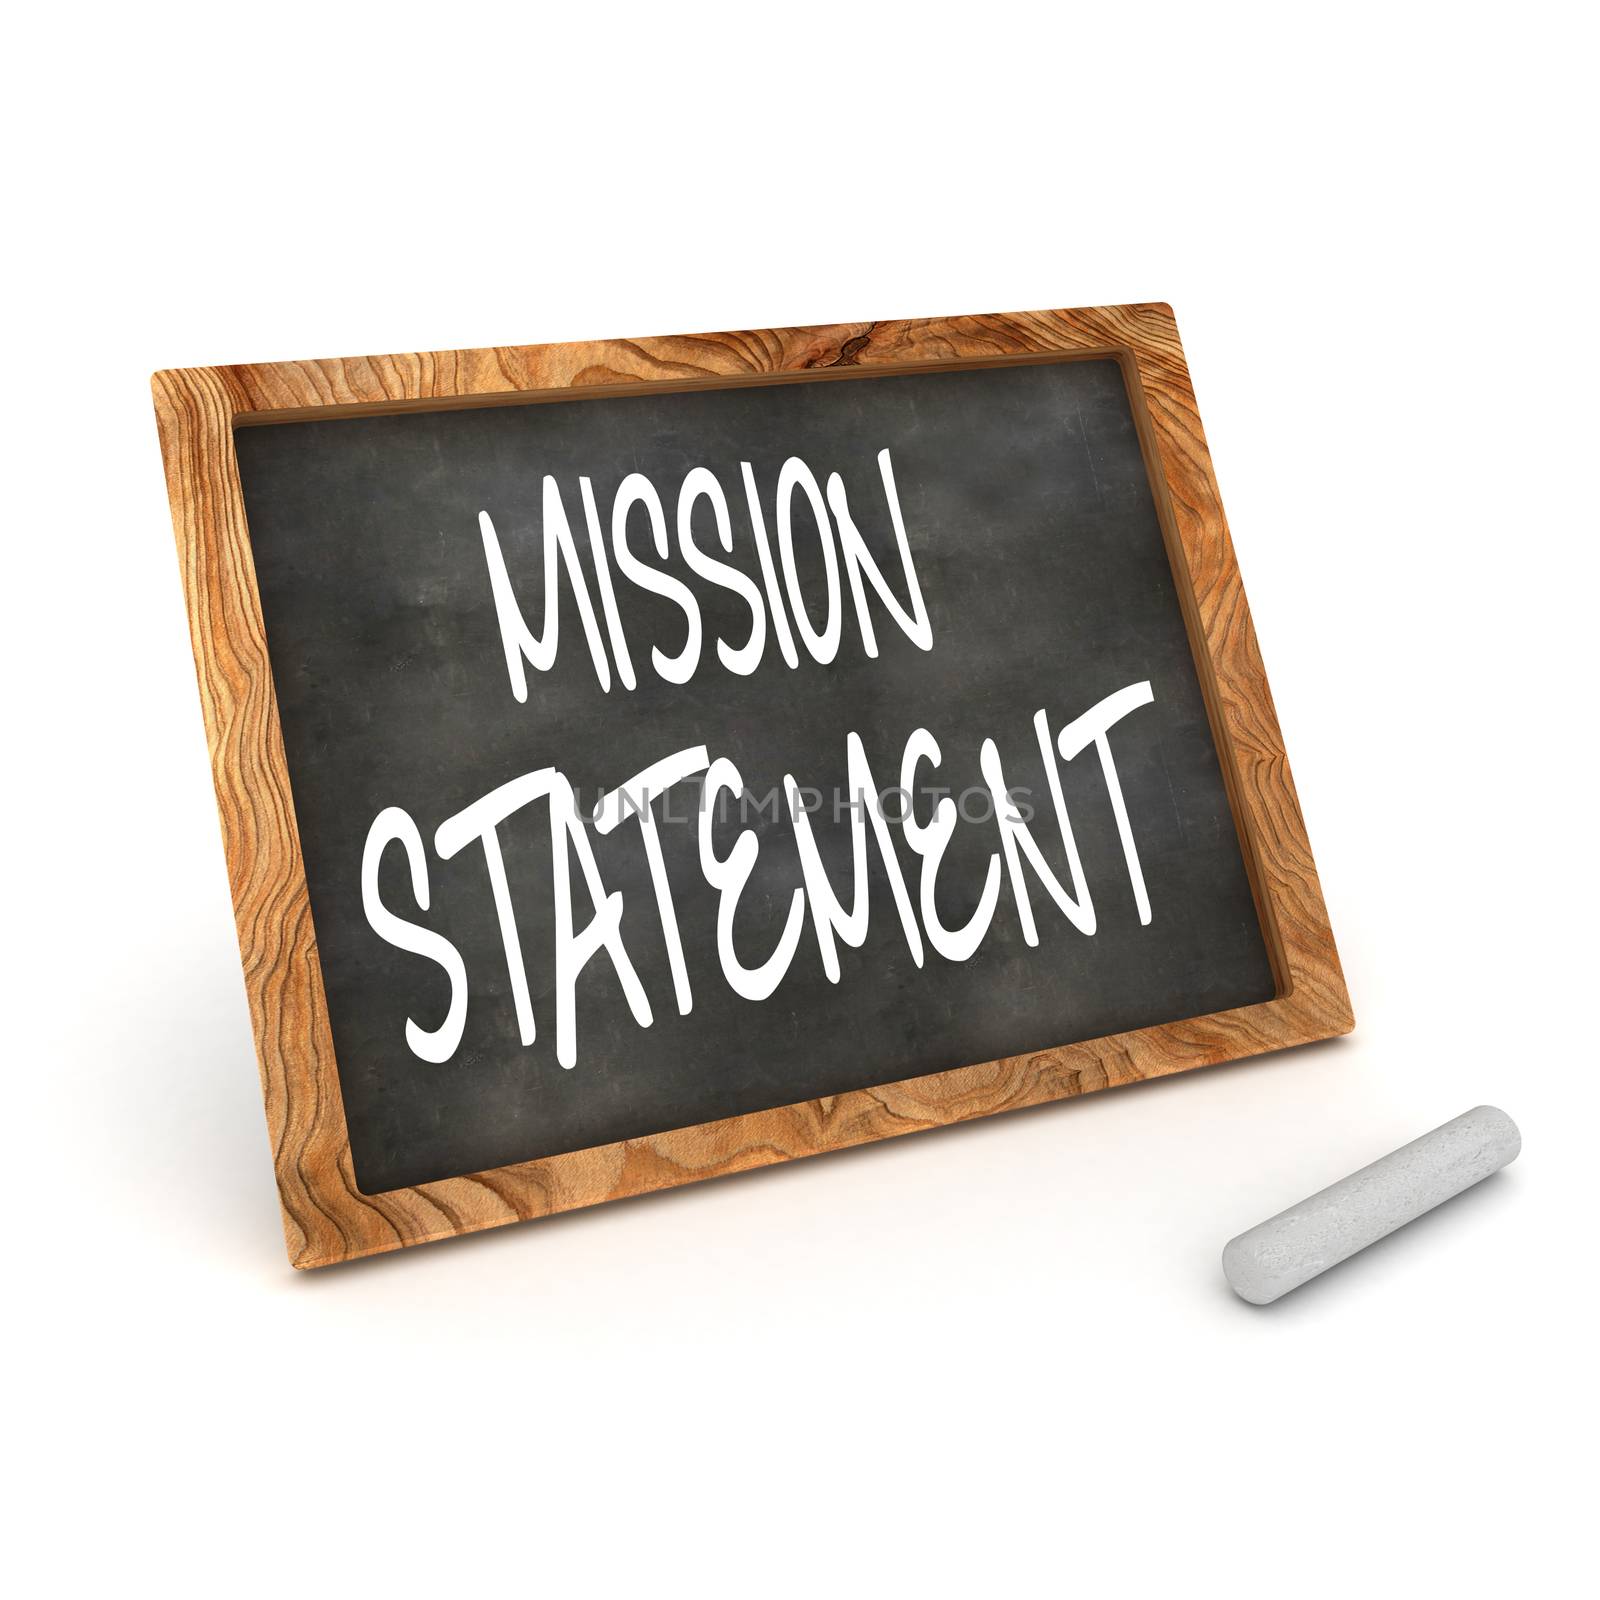 A Colourful 3d Rendered Illustration of a Blackboard showing Mission Statement